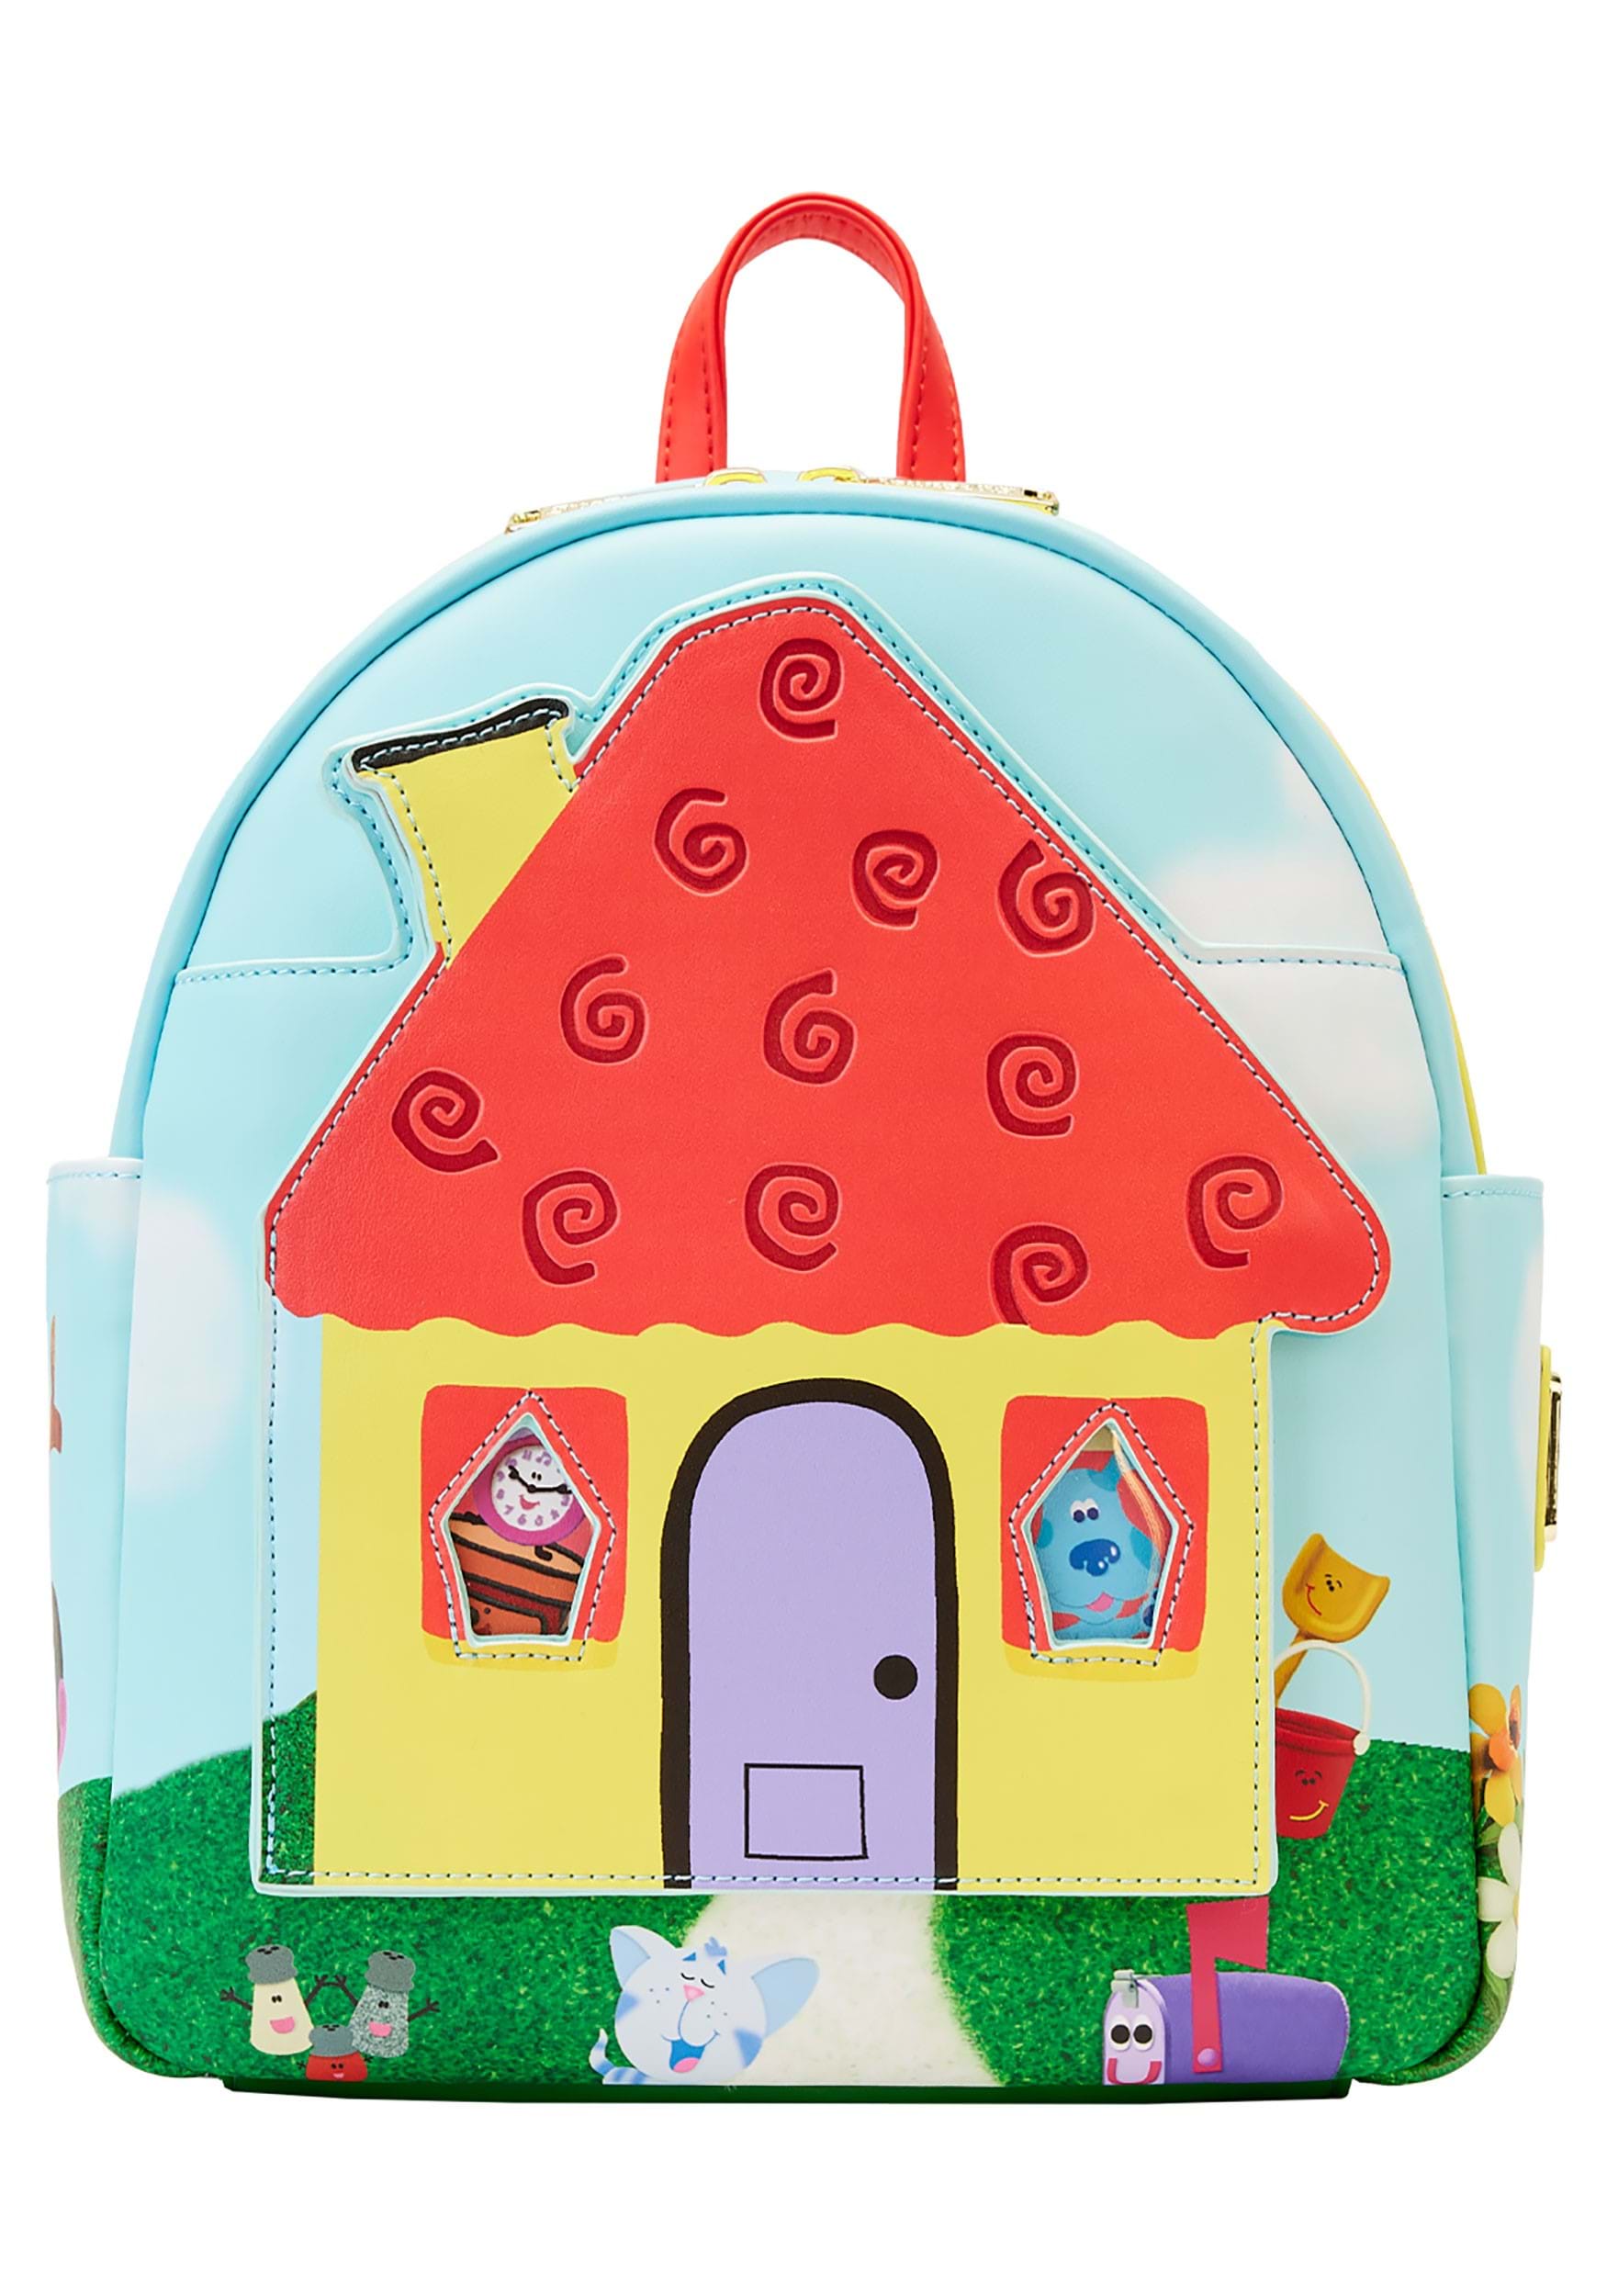 Nickelodeon Blues Clues Open House Mini Backpack by Loungefly